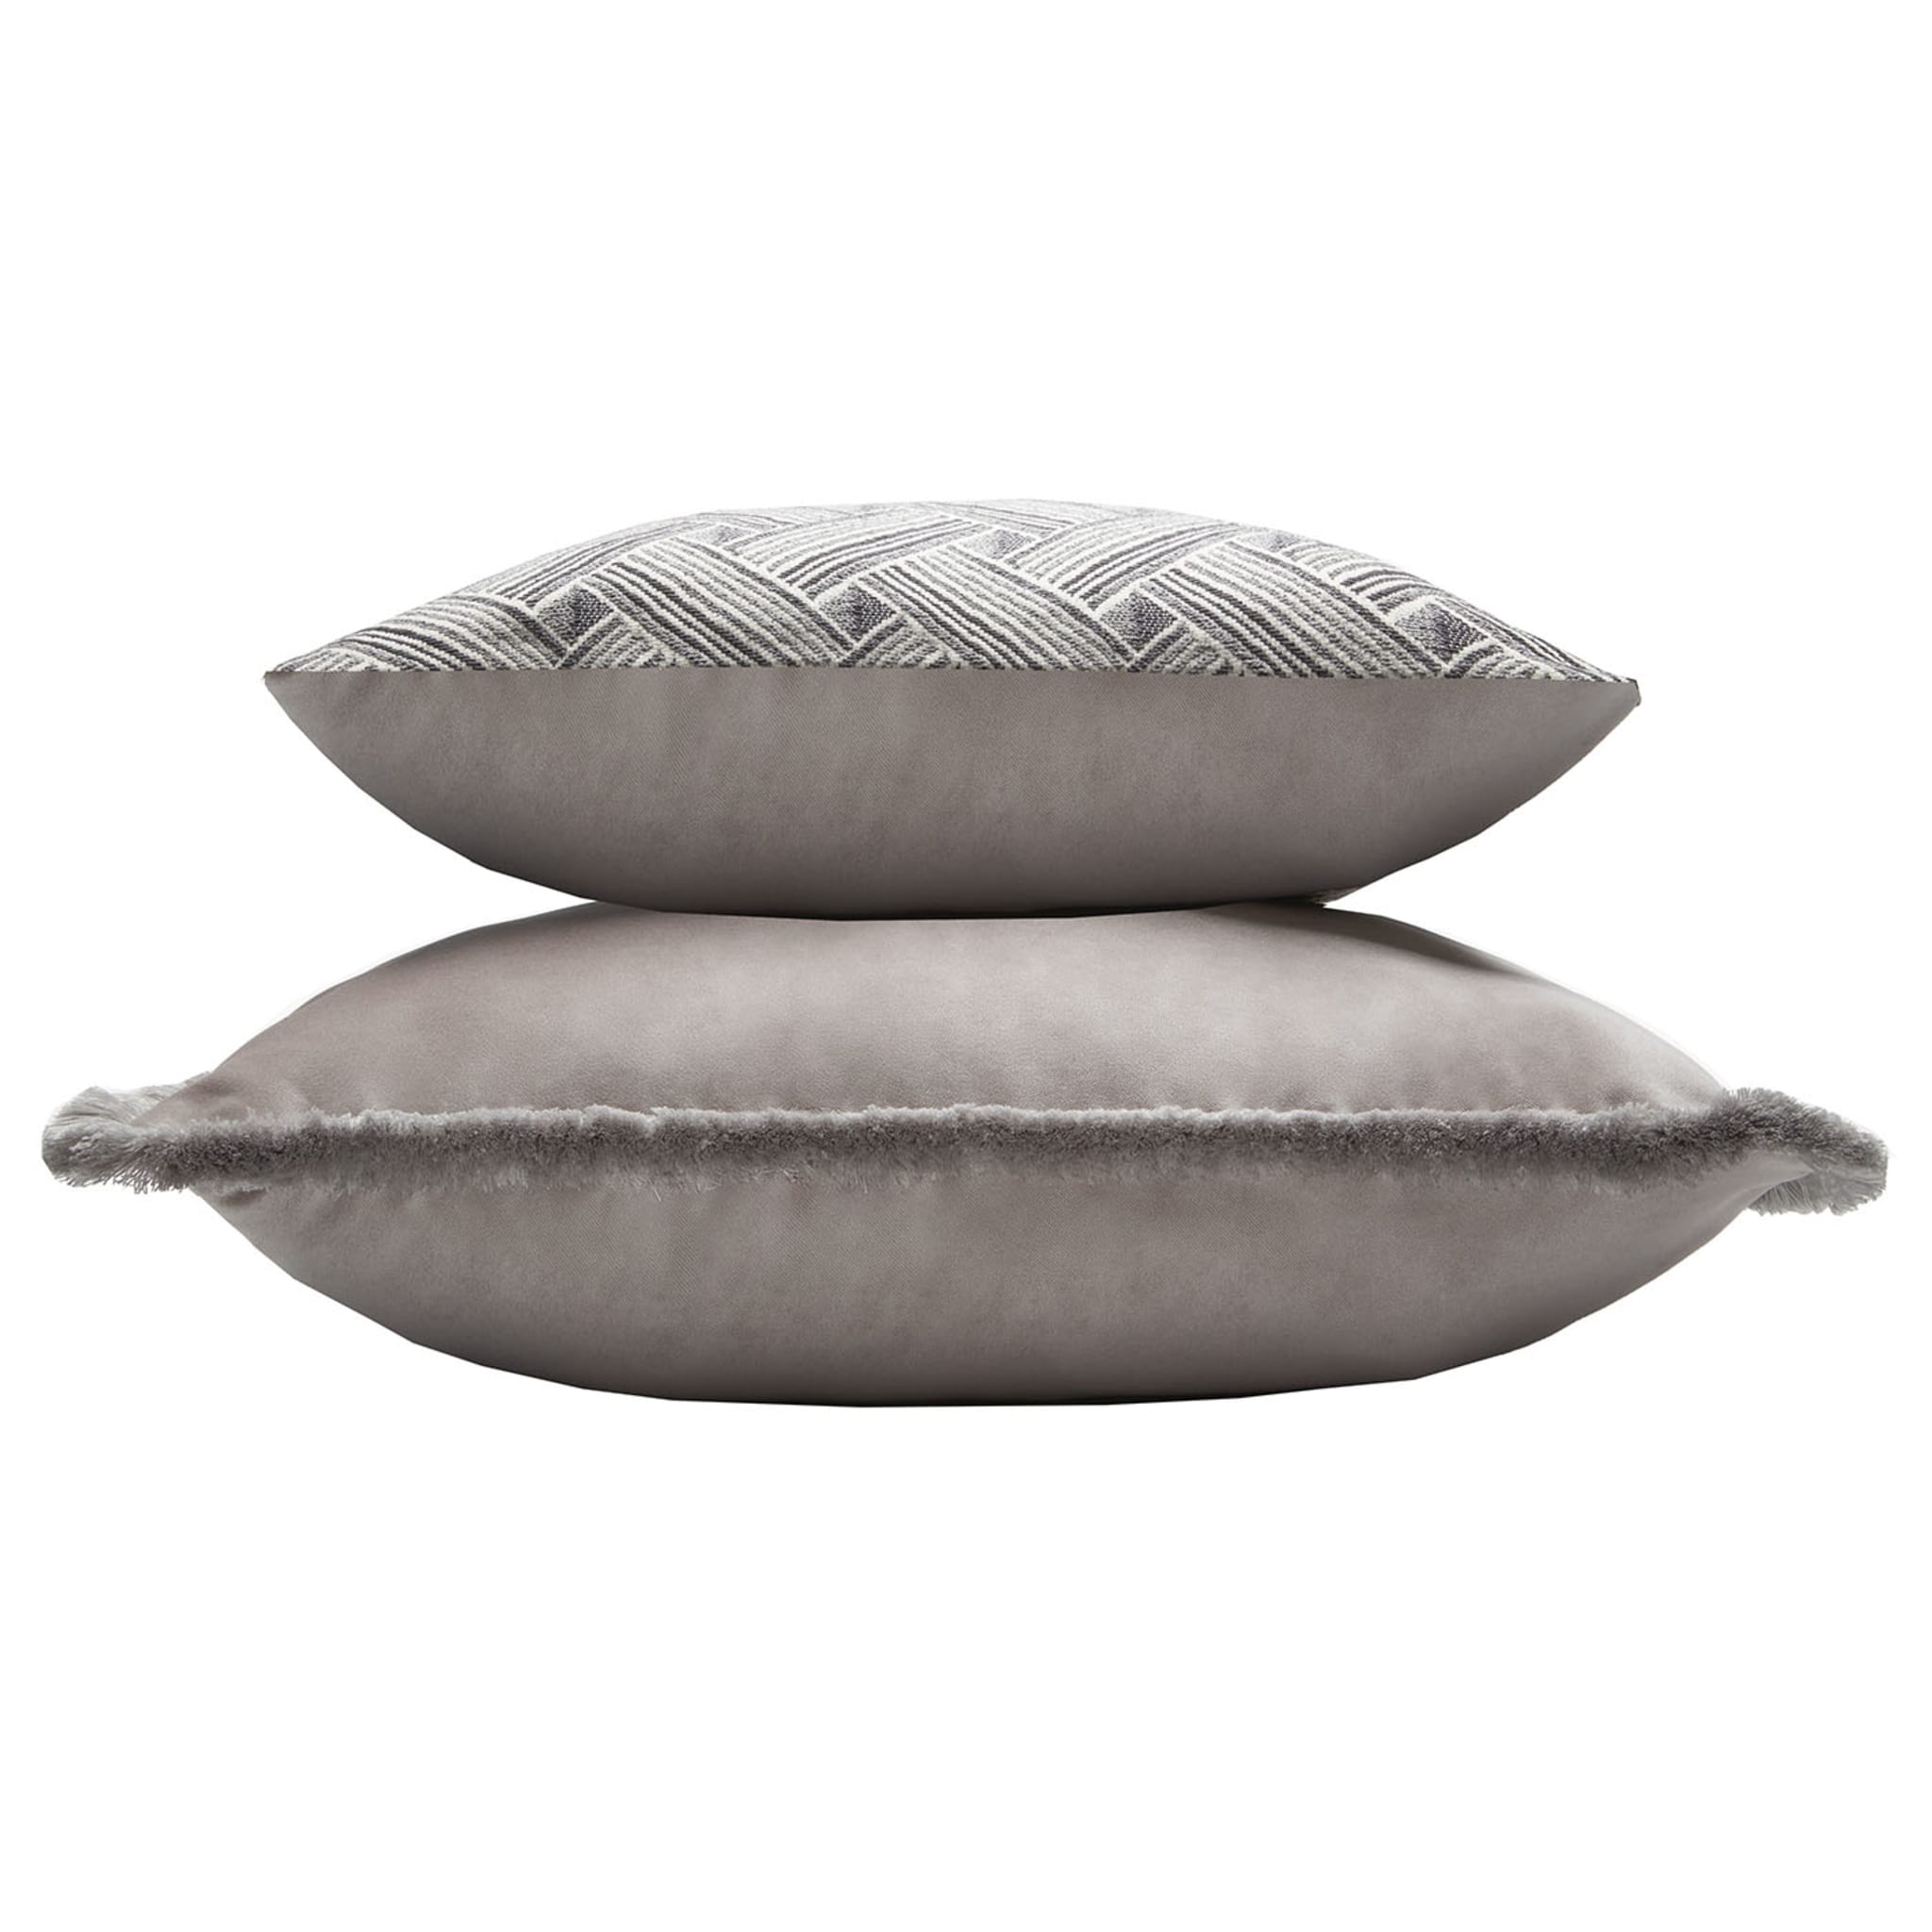 Rock Collection Gray Cushion - Alternative view 2